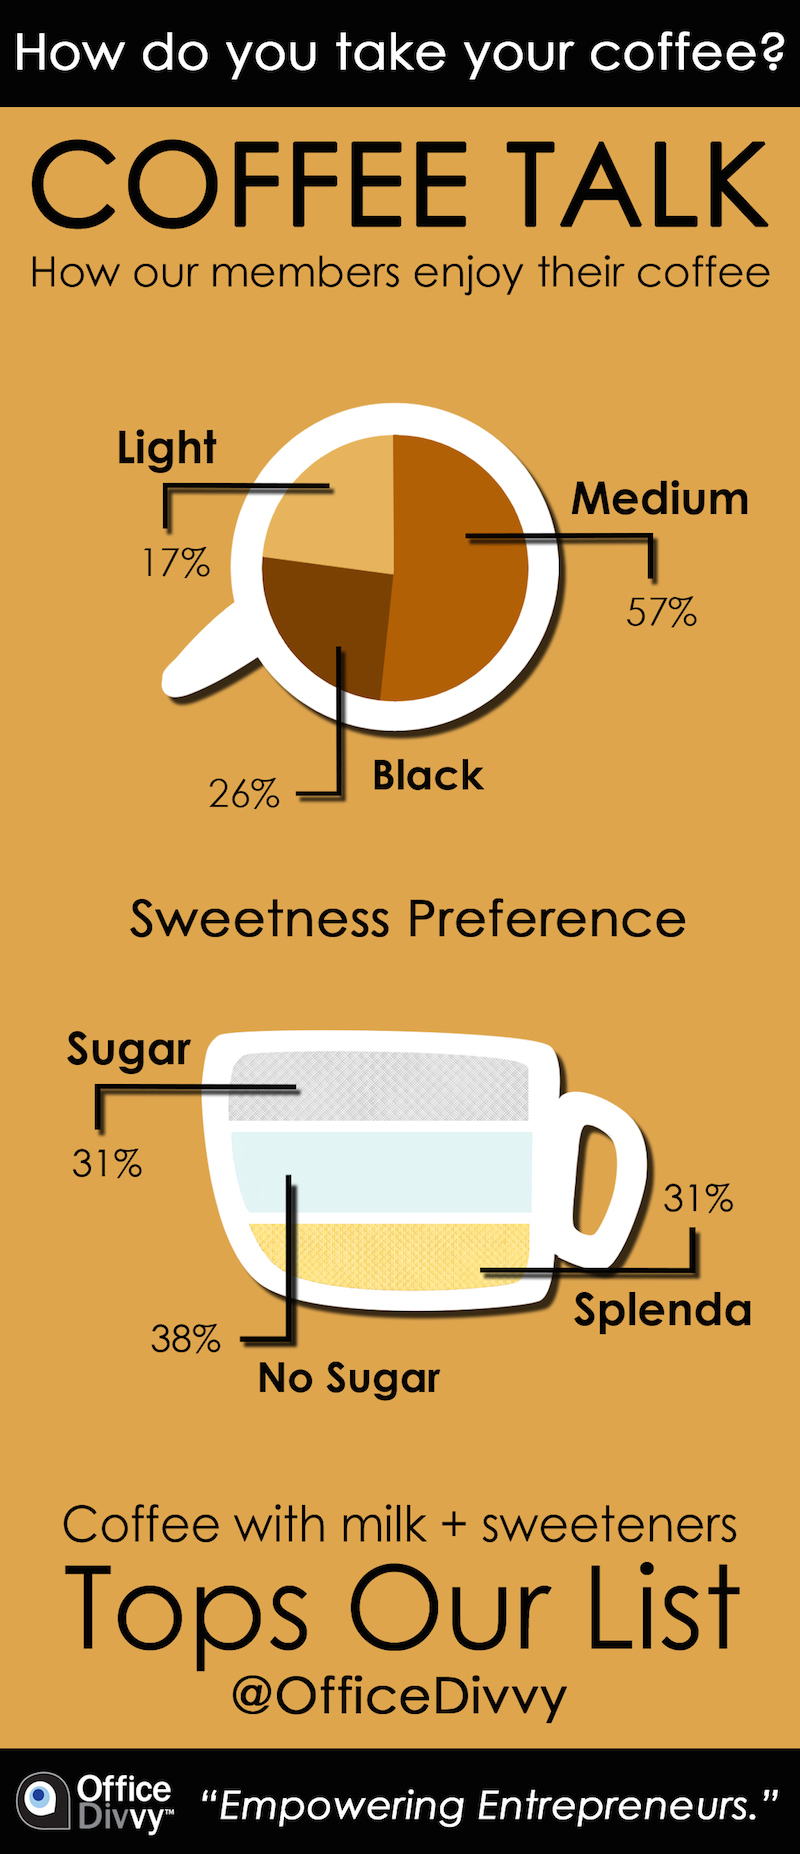 Office-Divvy-Coffee-Infographic-Final-2-AK-060315